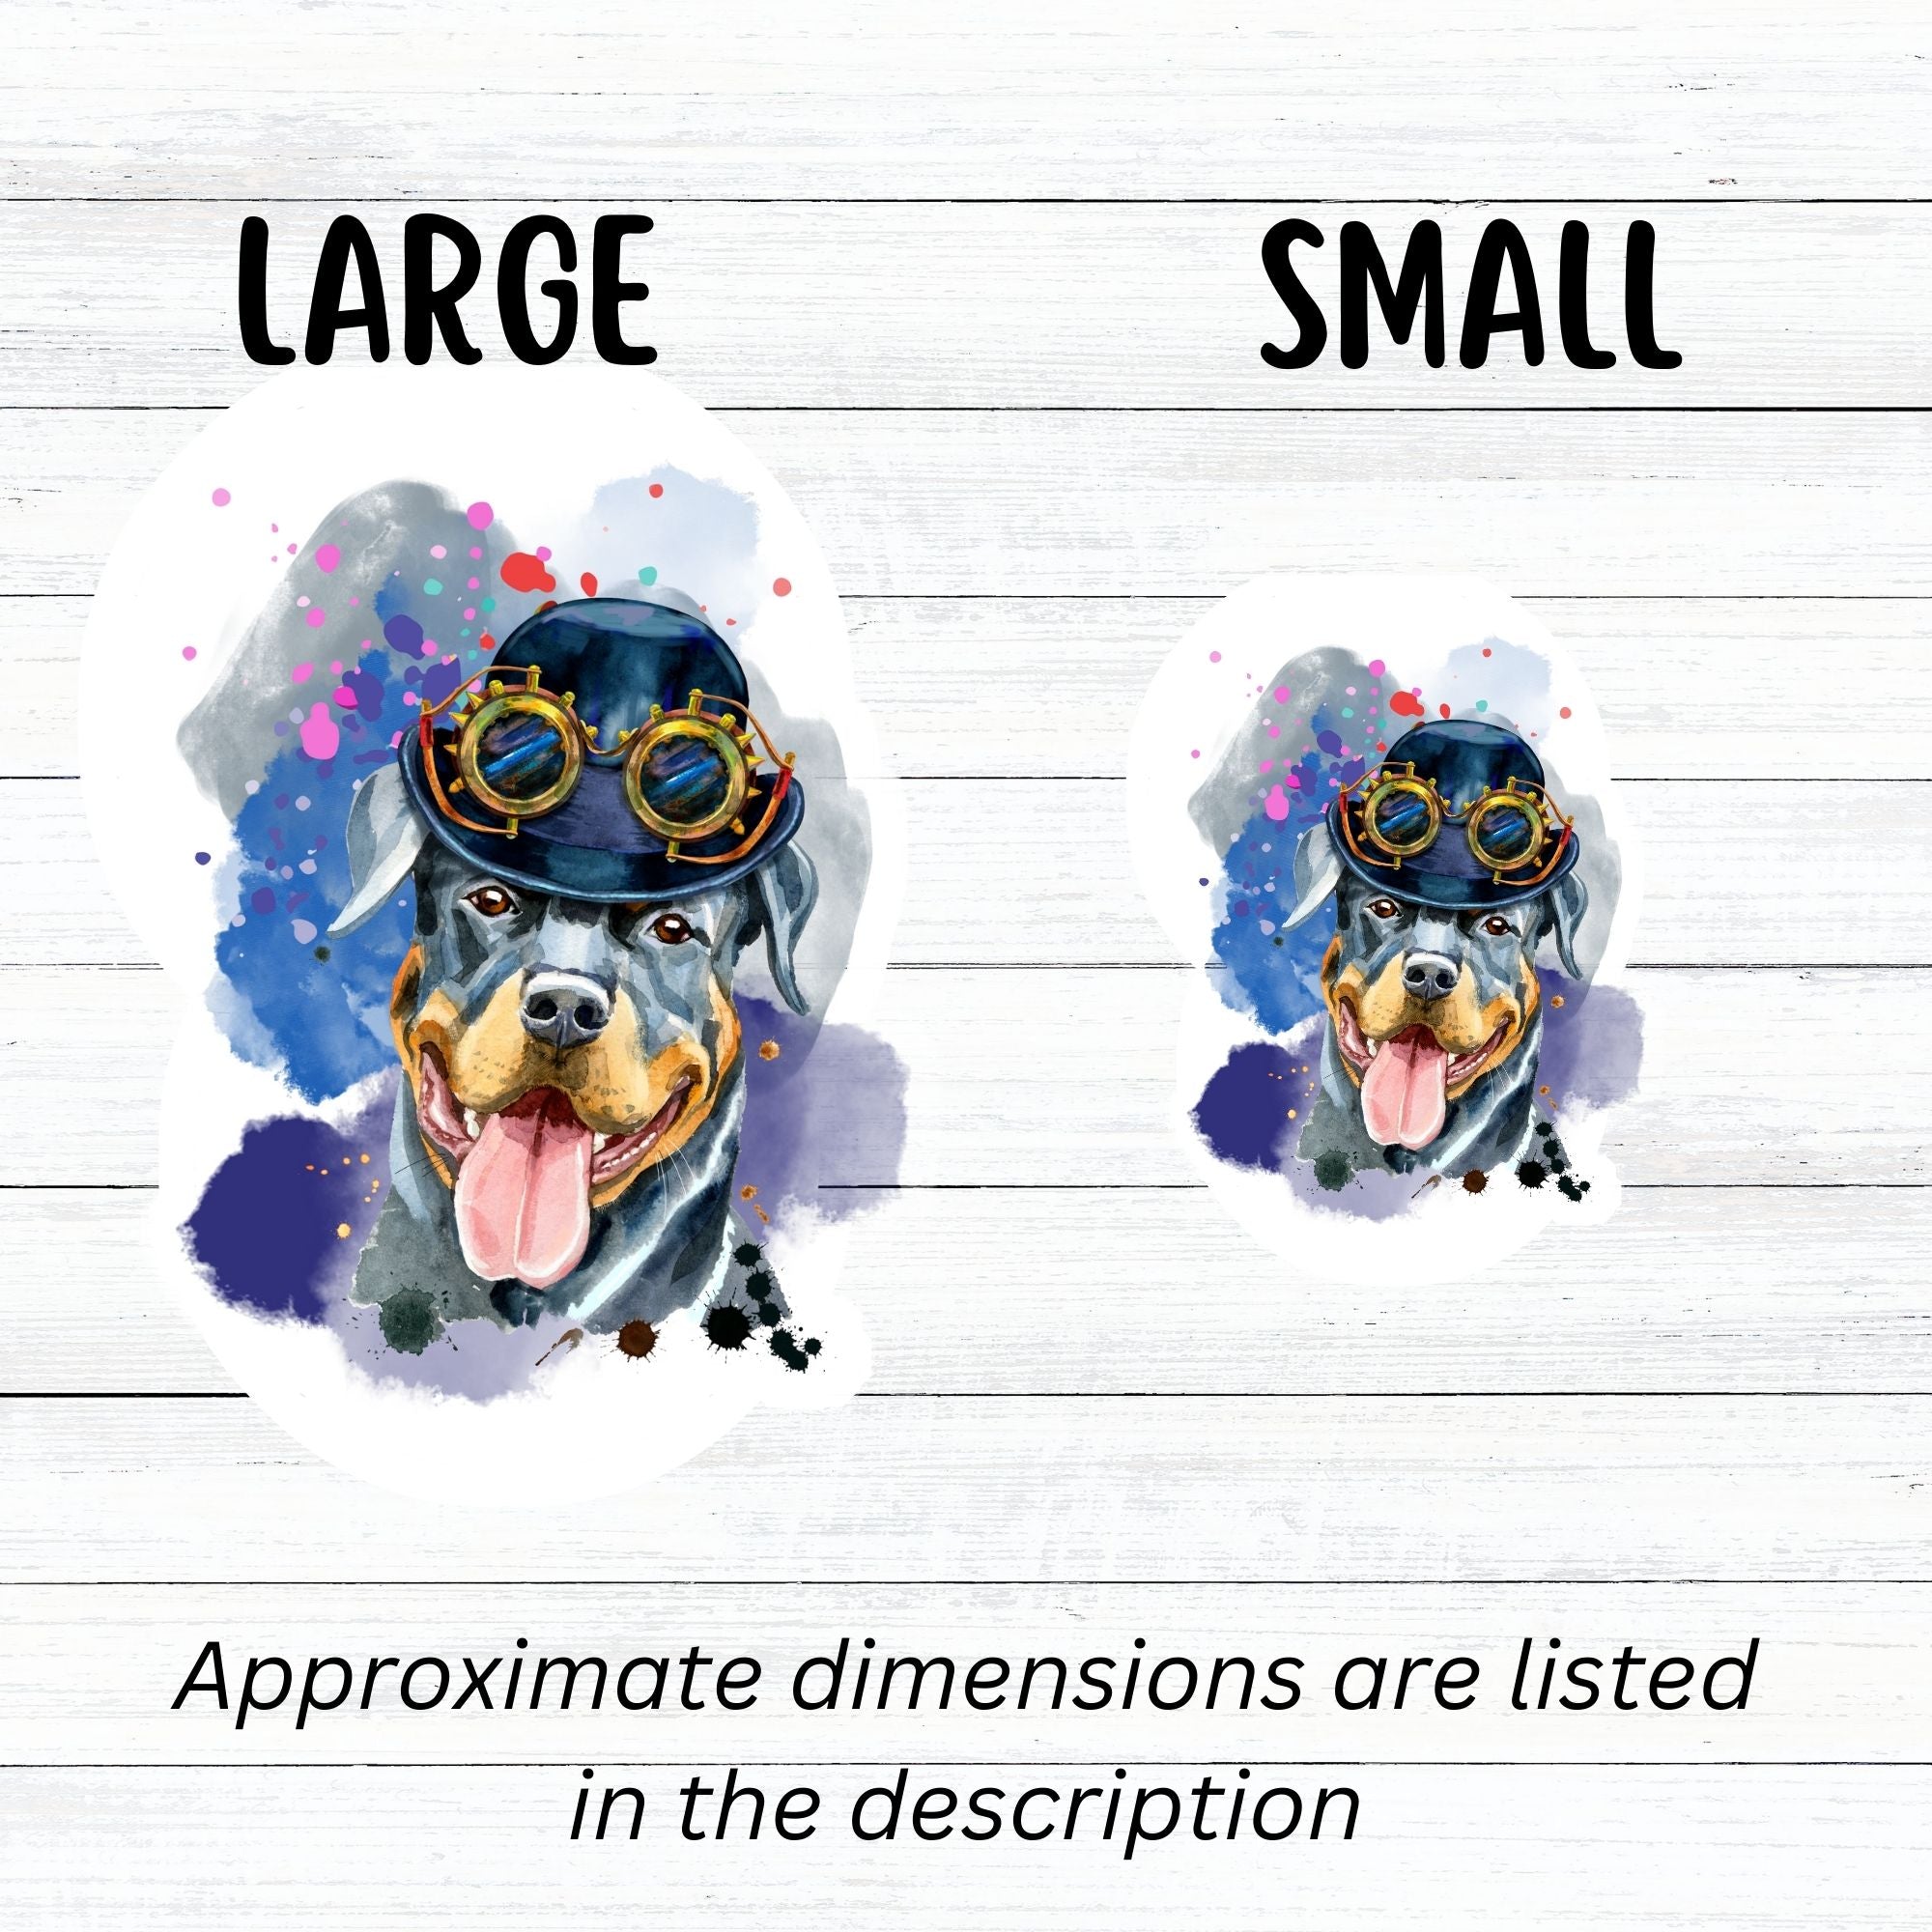 Steampunk Rotty is a happy looking Rottweiler with a steampunk hat and goggles, all on a pastel background. This image shows the large and small steampunk Rottweiler stickers next to each other.